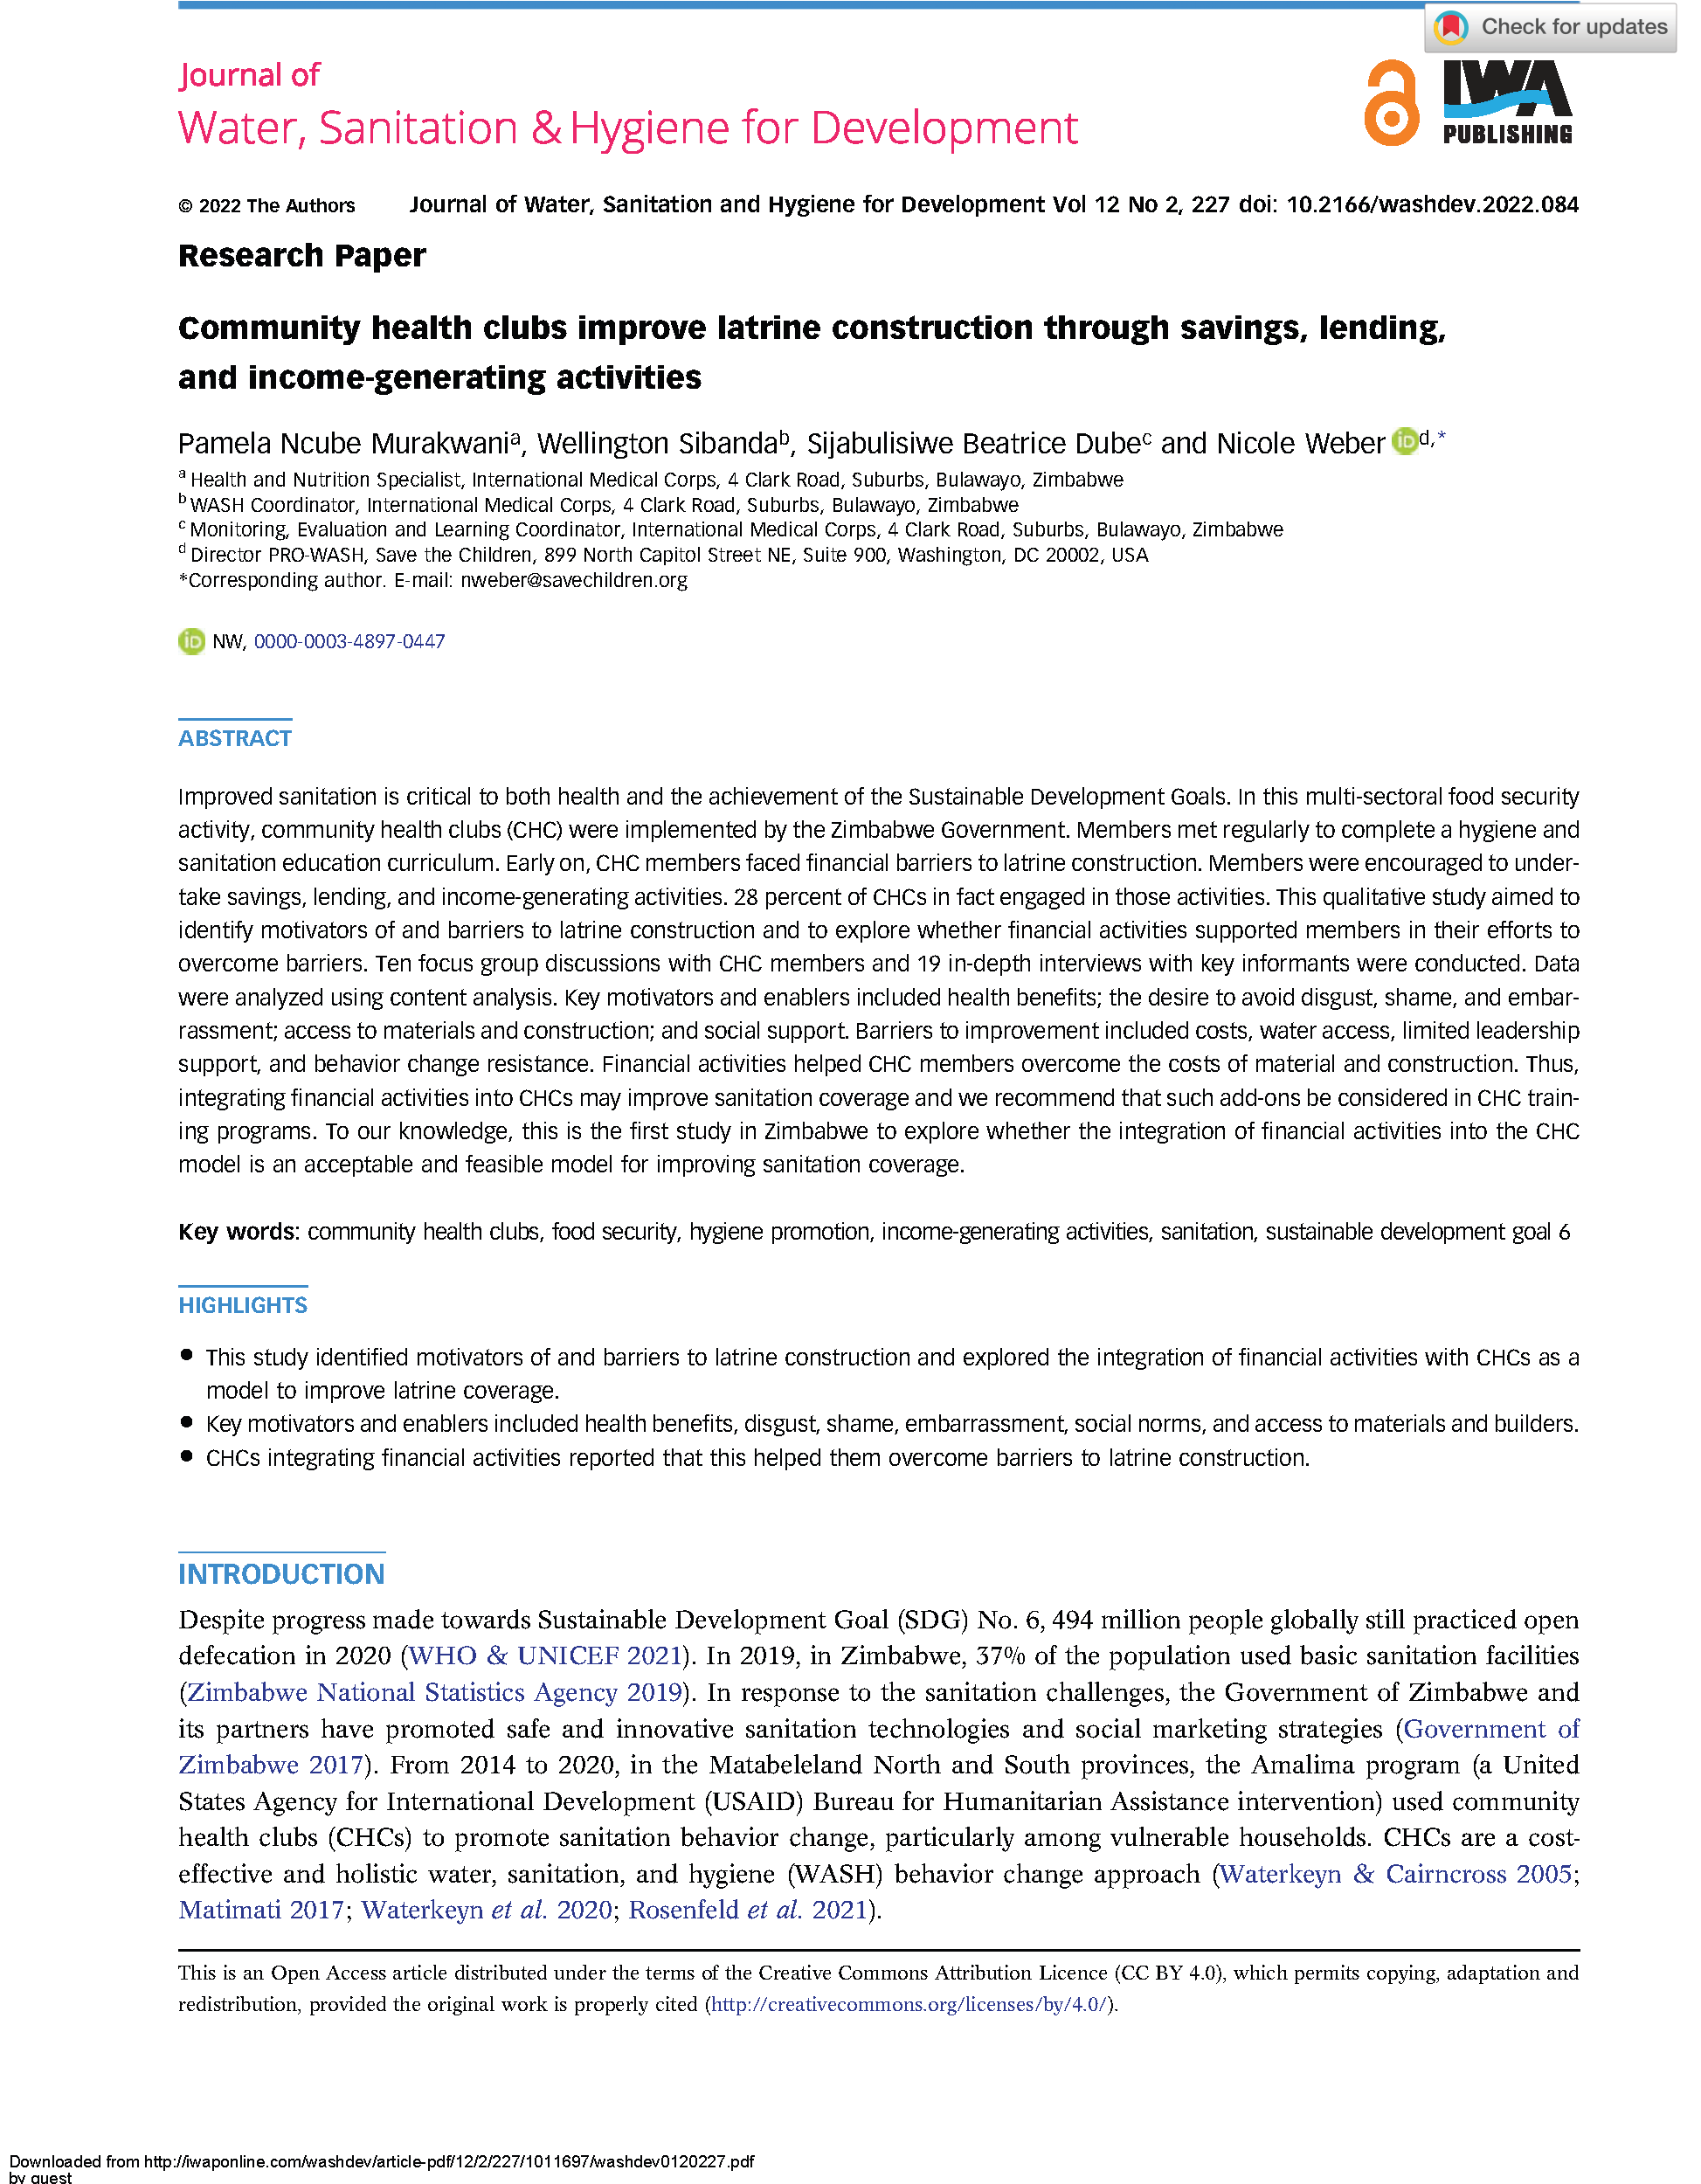 Cover-page for Community health clubs improve latrine construction through savings, lending, and income-generating activities